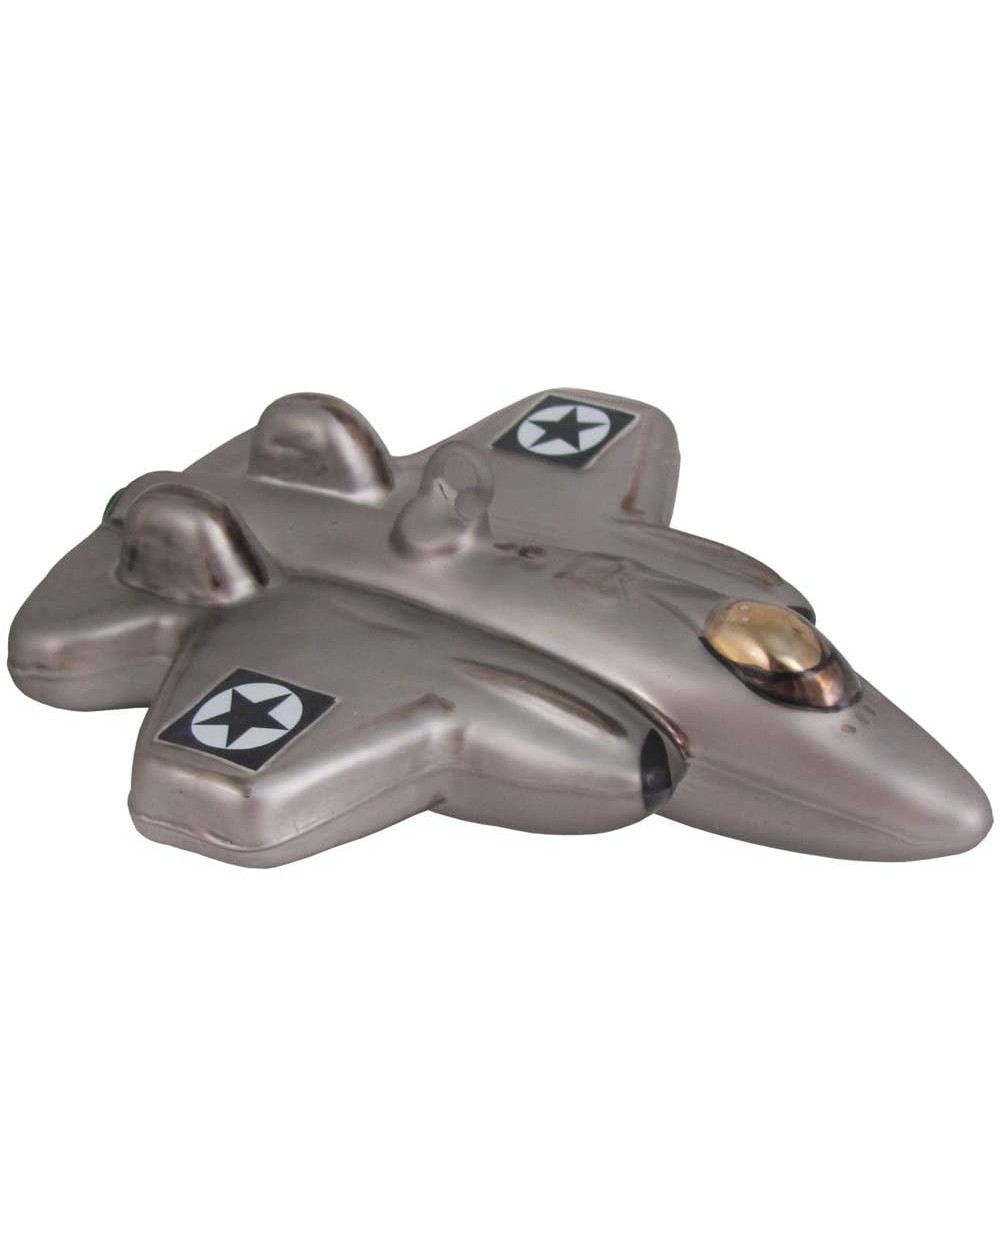 Ornaments Silver Fighter Jet Christmas Holiday Glass 5 Inch Ornament - Jet - C211ZP85RI9 $12.05